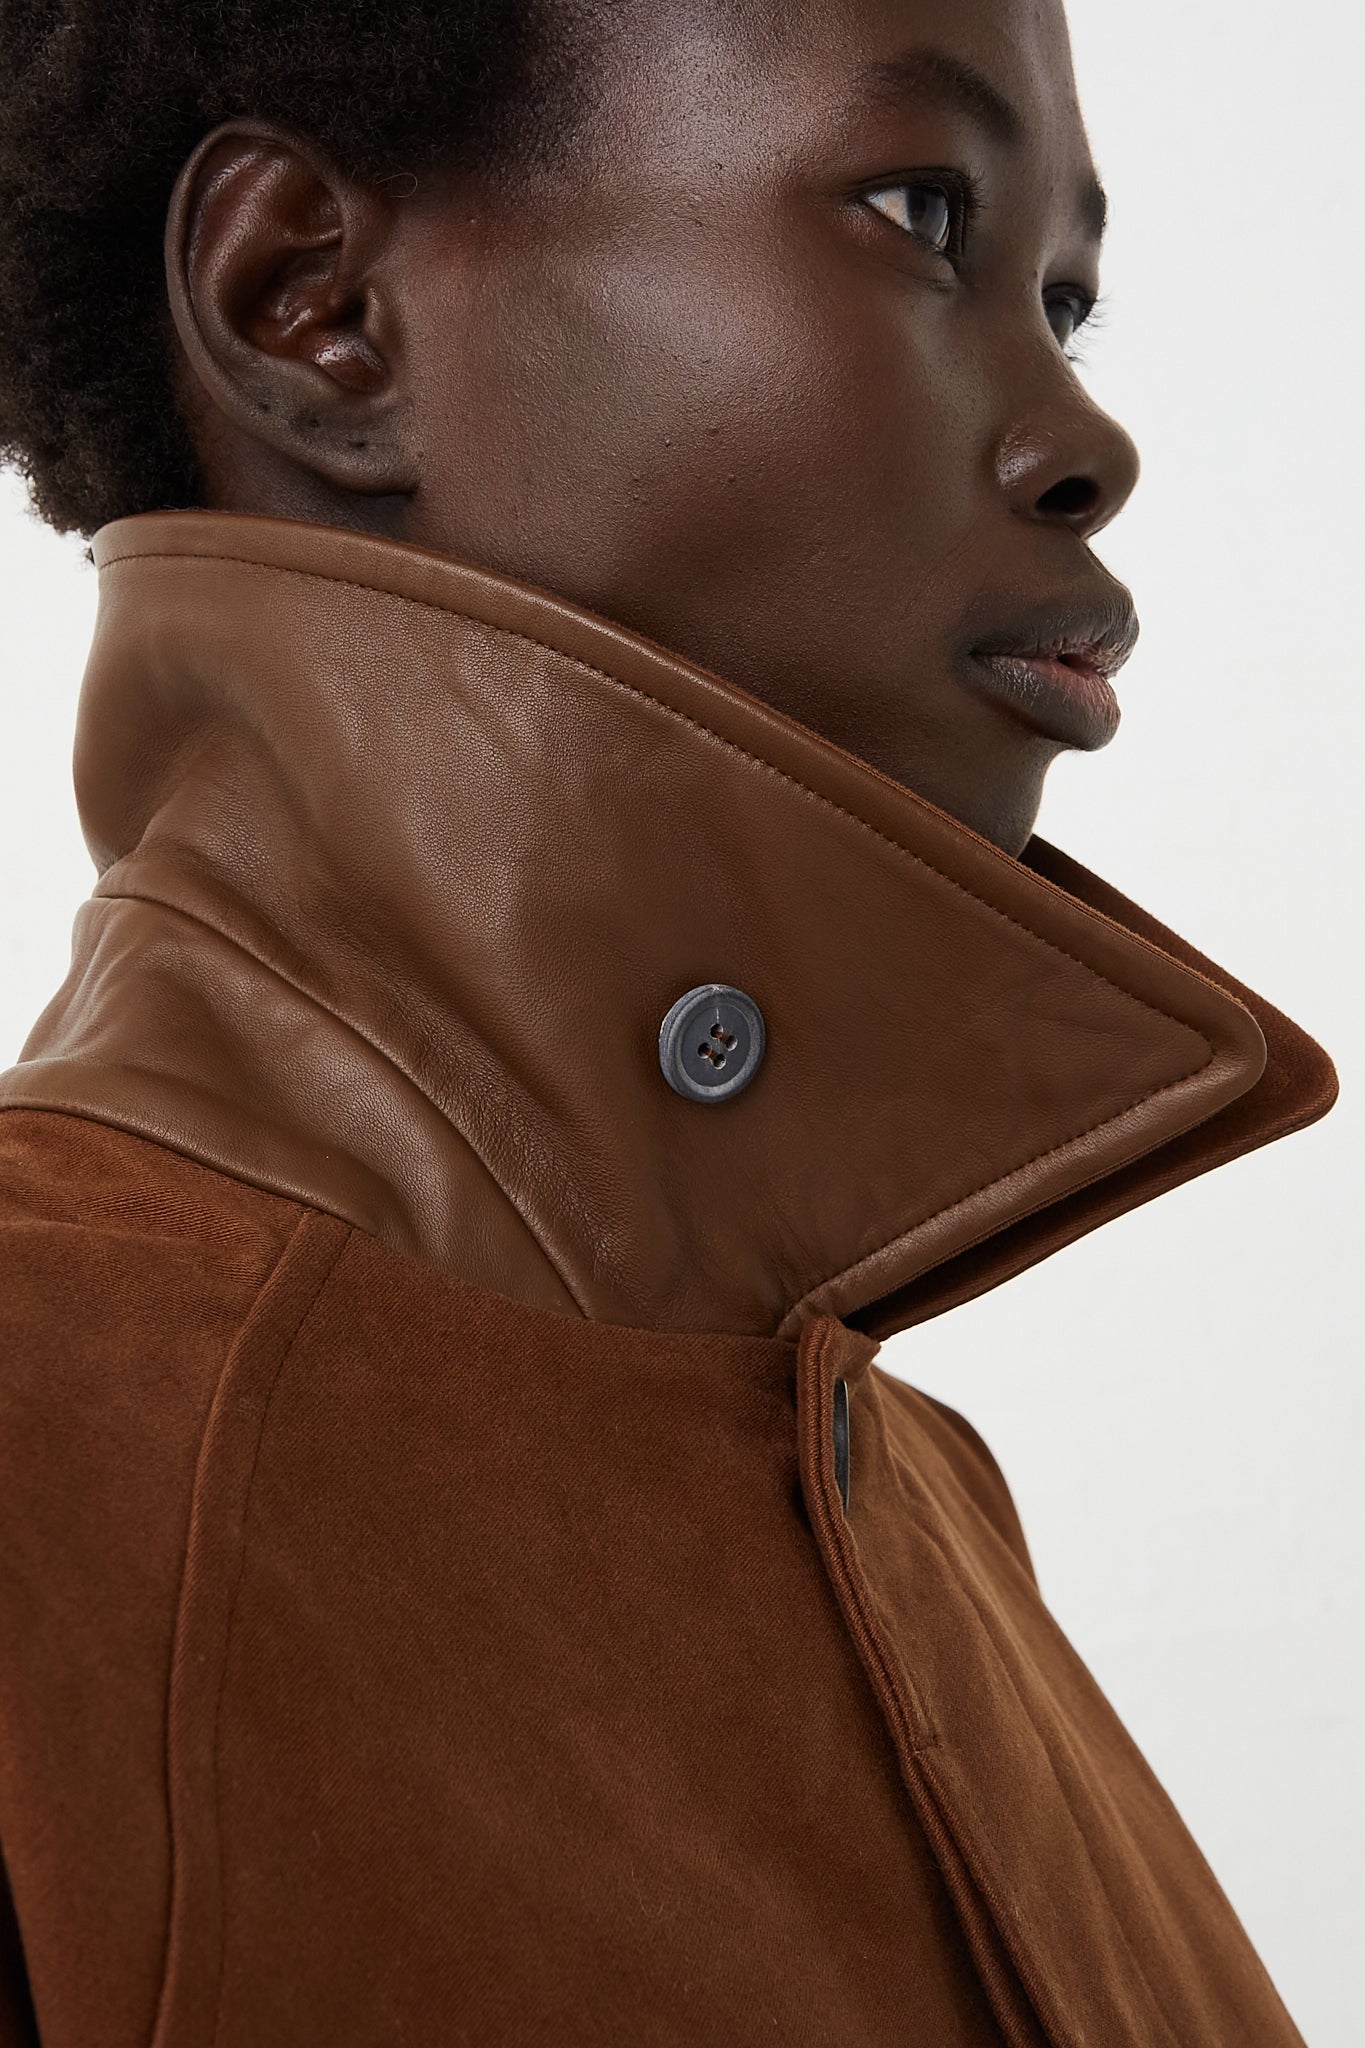 Oversized Trench in Cognac by CristaSeya for Oroboro Front Collar